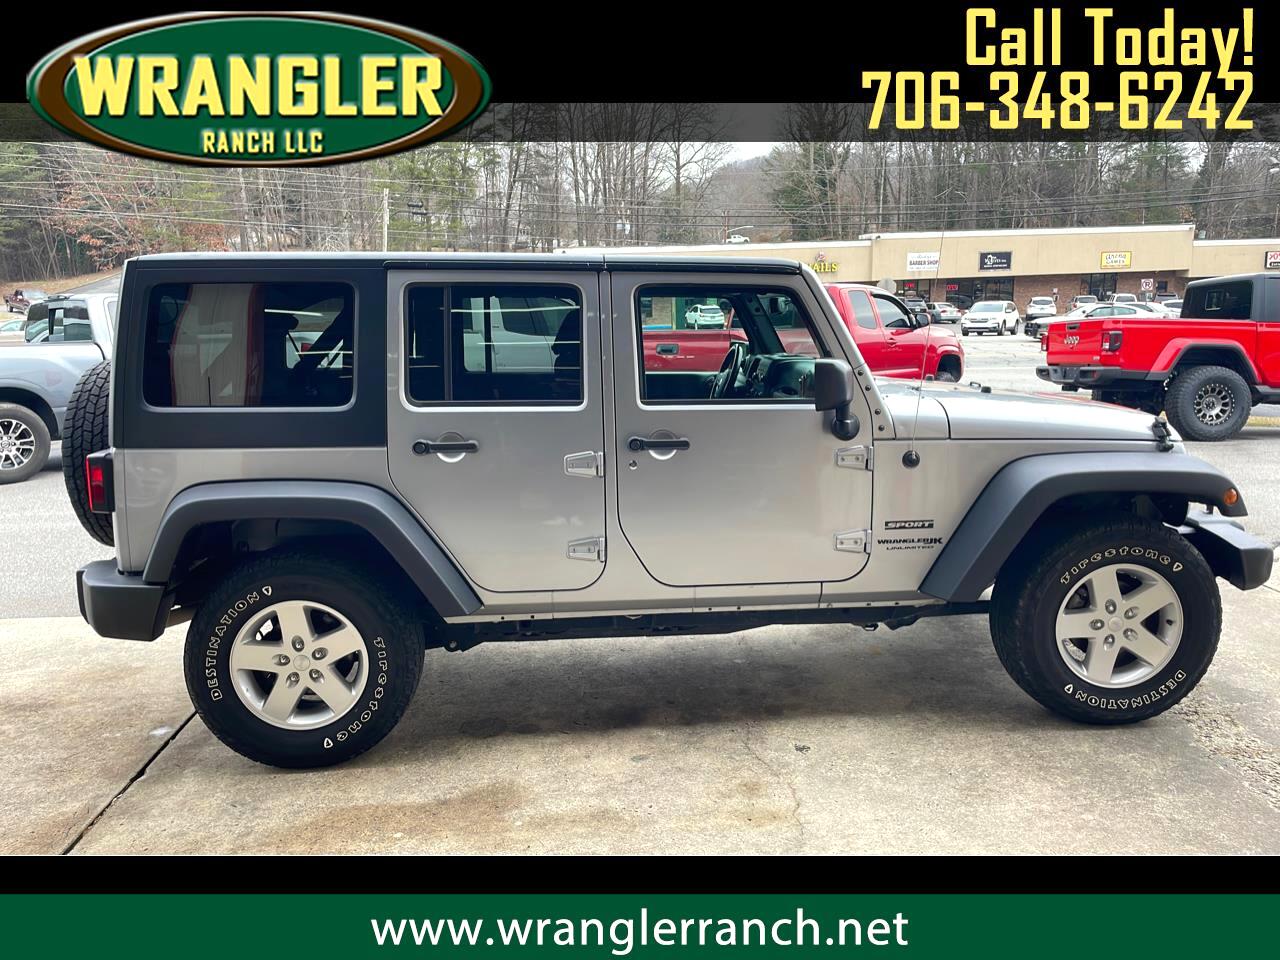 Used 2018 Jeep Wrangler JK Unlimited Sport 4WD for Sale in Cleveland GA  30528 The Wrangler Ranch